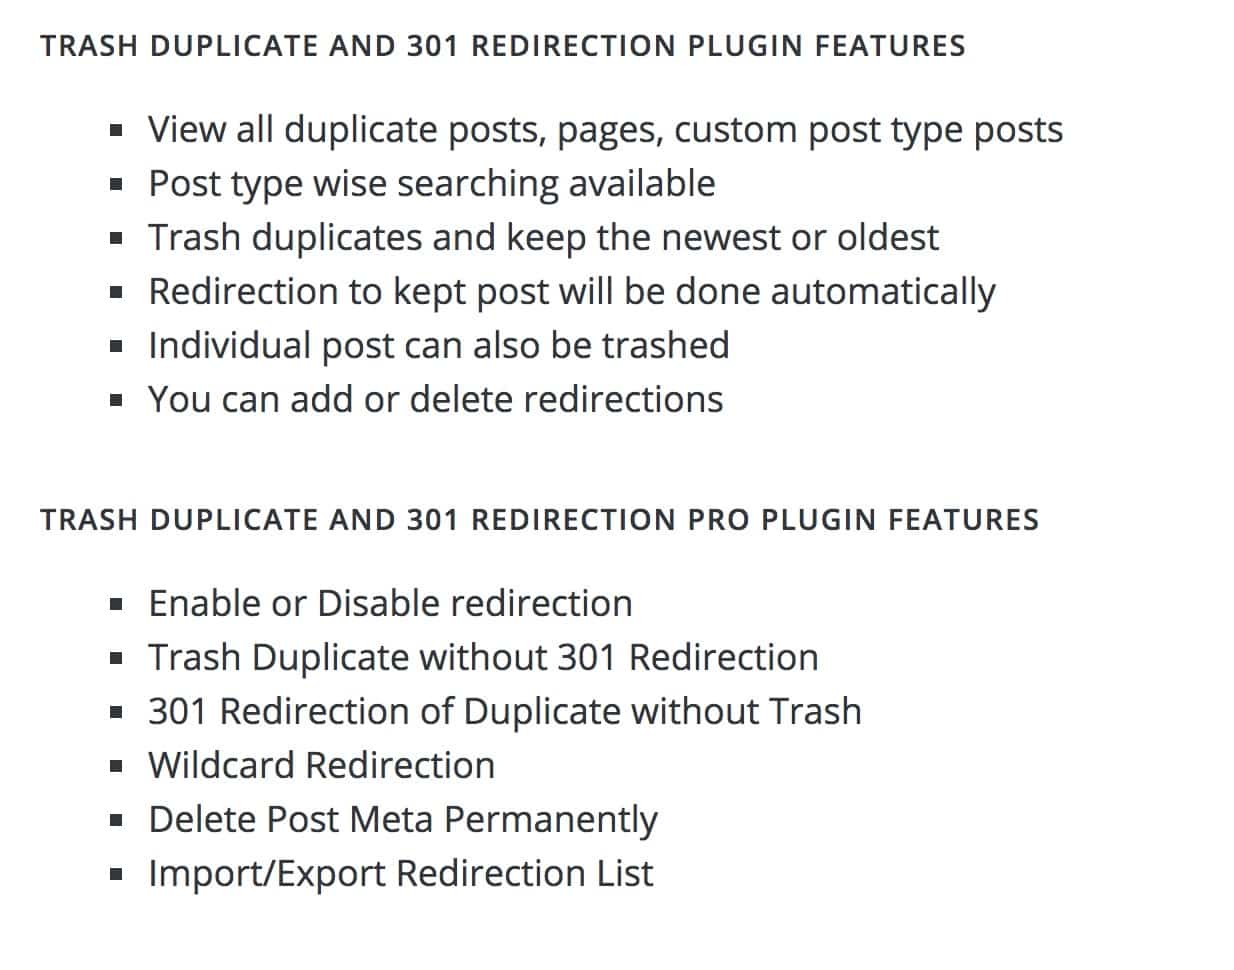 Trash Duplicate and 301 Redirect features